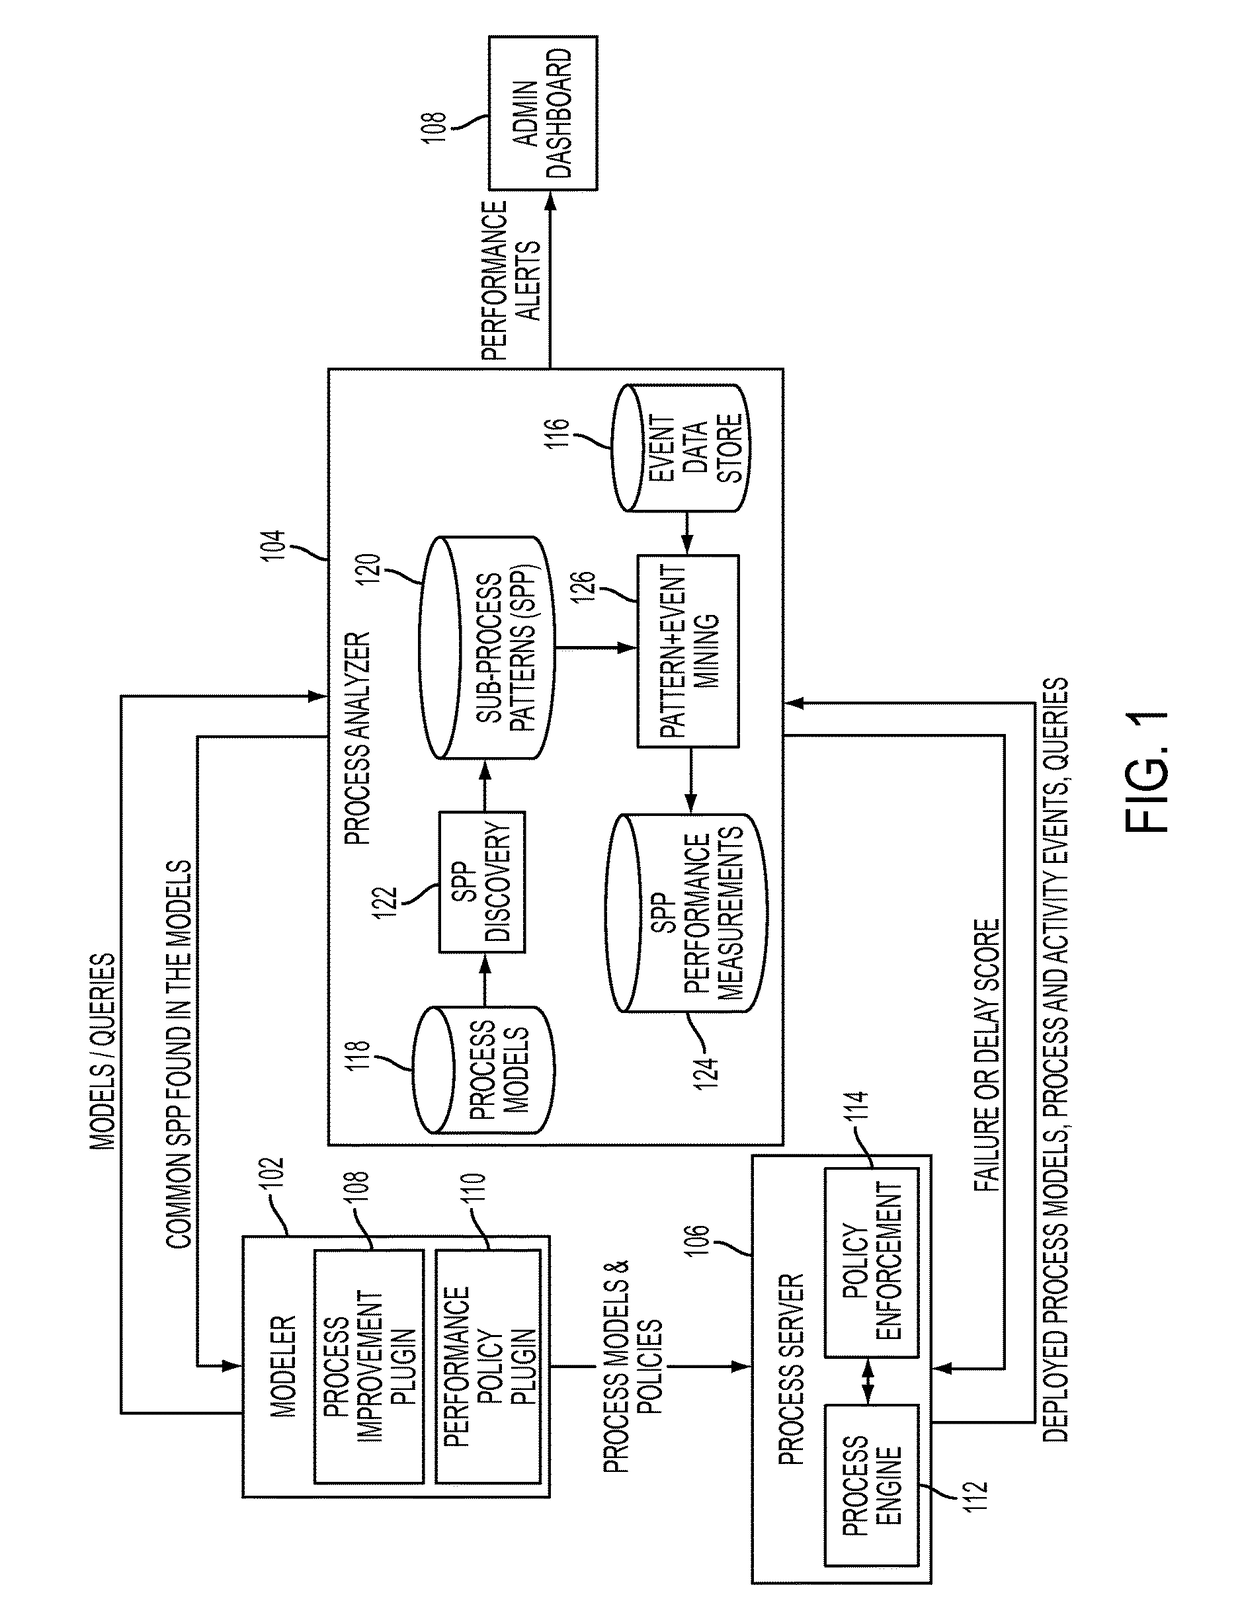 Measuring process model performance and enforcing process performance policy